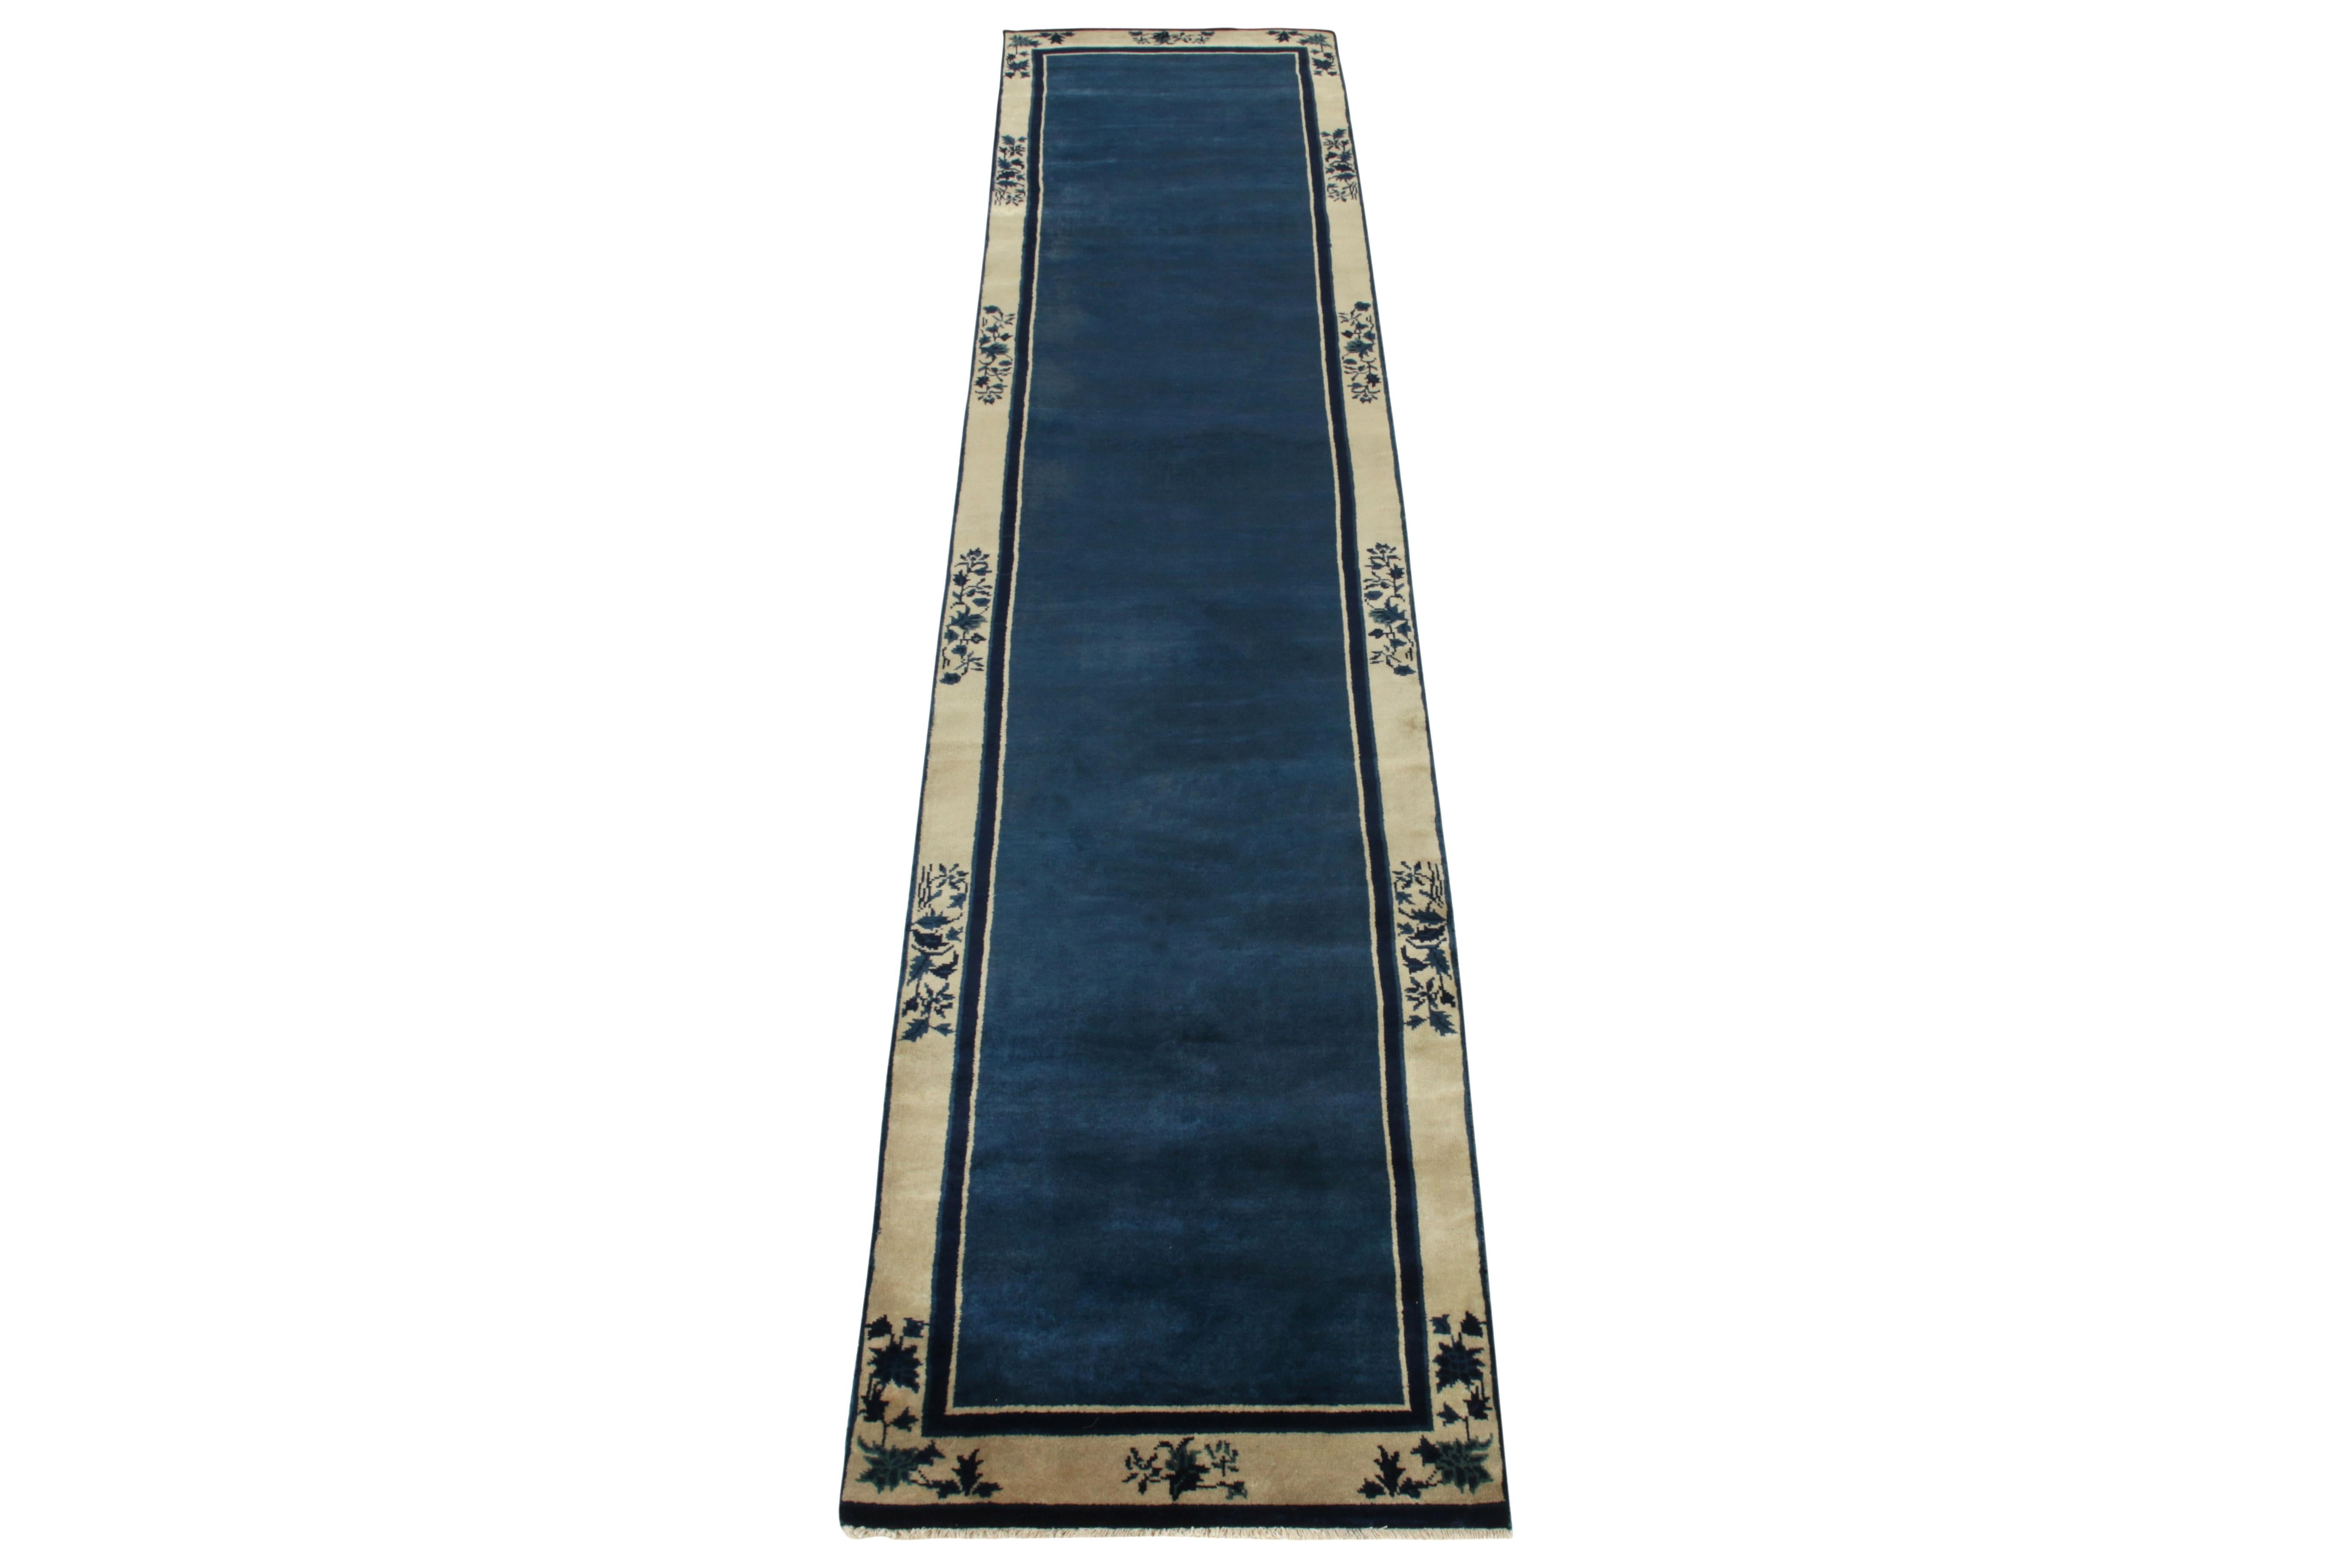 Vintage Chinese Deco style runner, deep blue floral pattern, off white border
Description: A hand-knotted vintage runner inspired by Chinese Art Deco sensibilities of the 1920s, coming from Rug & Kilim’s Antique & Vintage collection. The clean blue